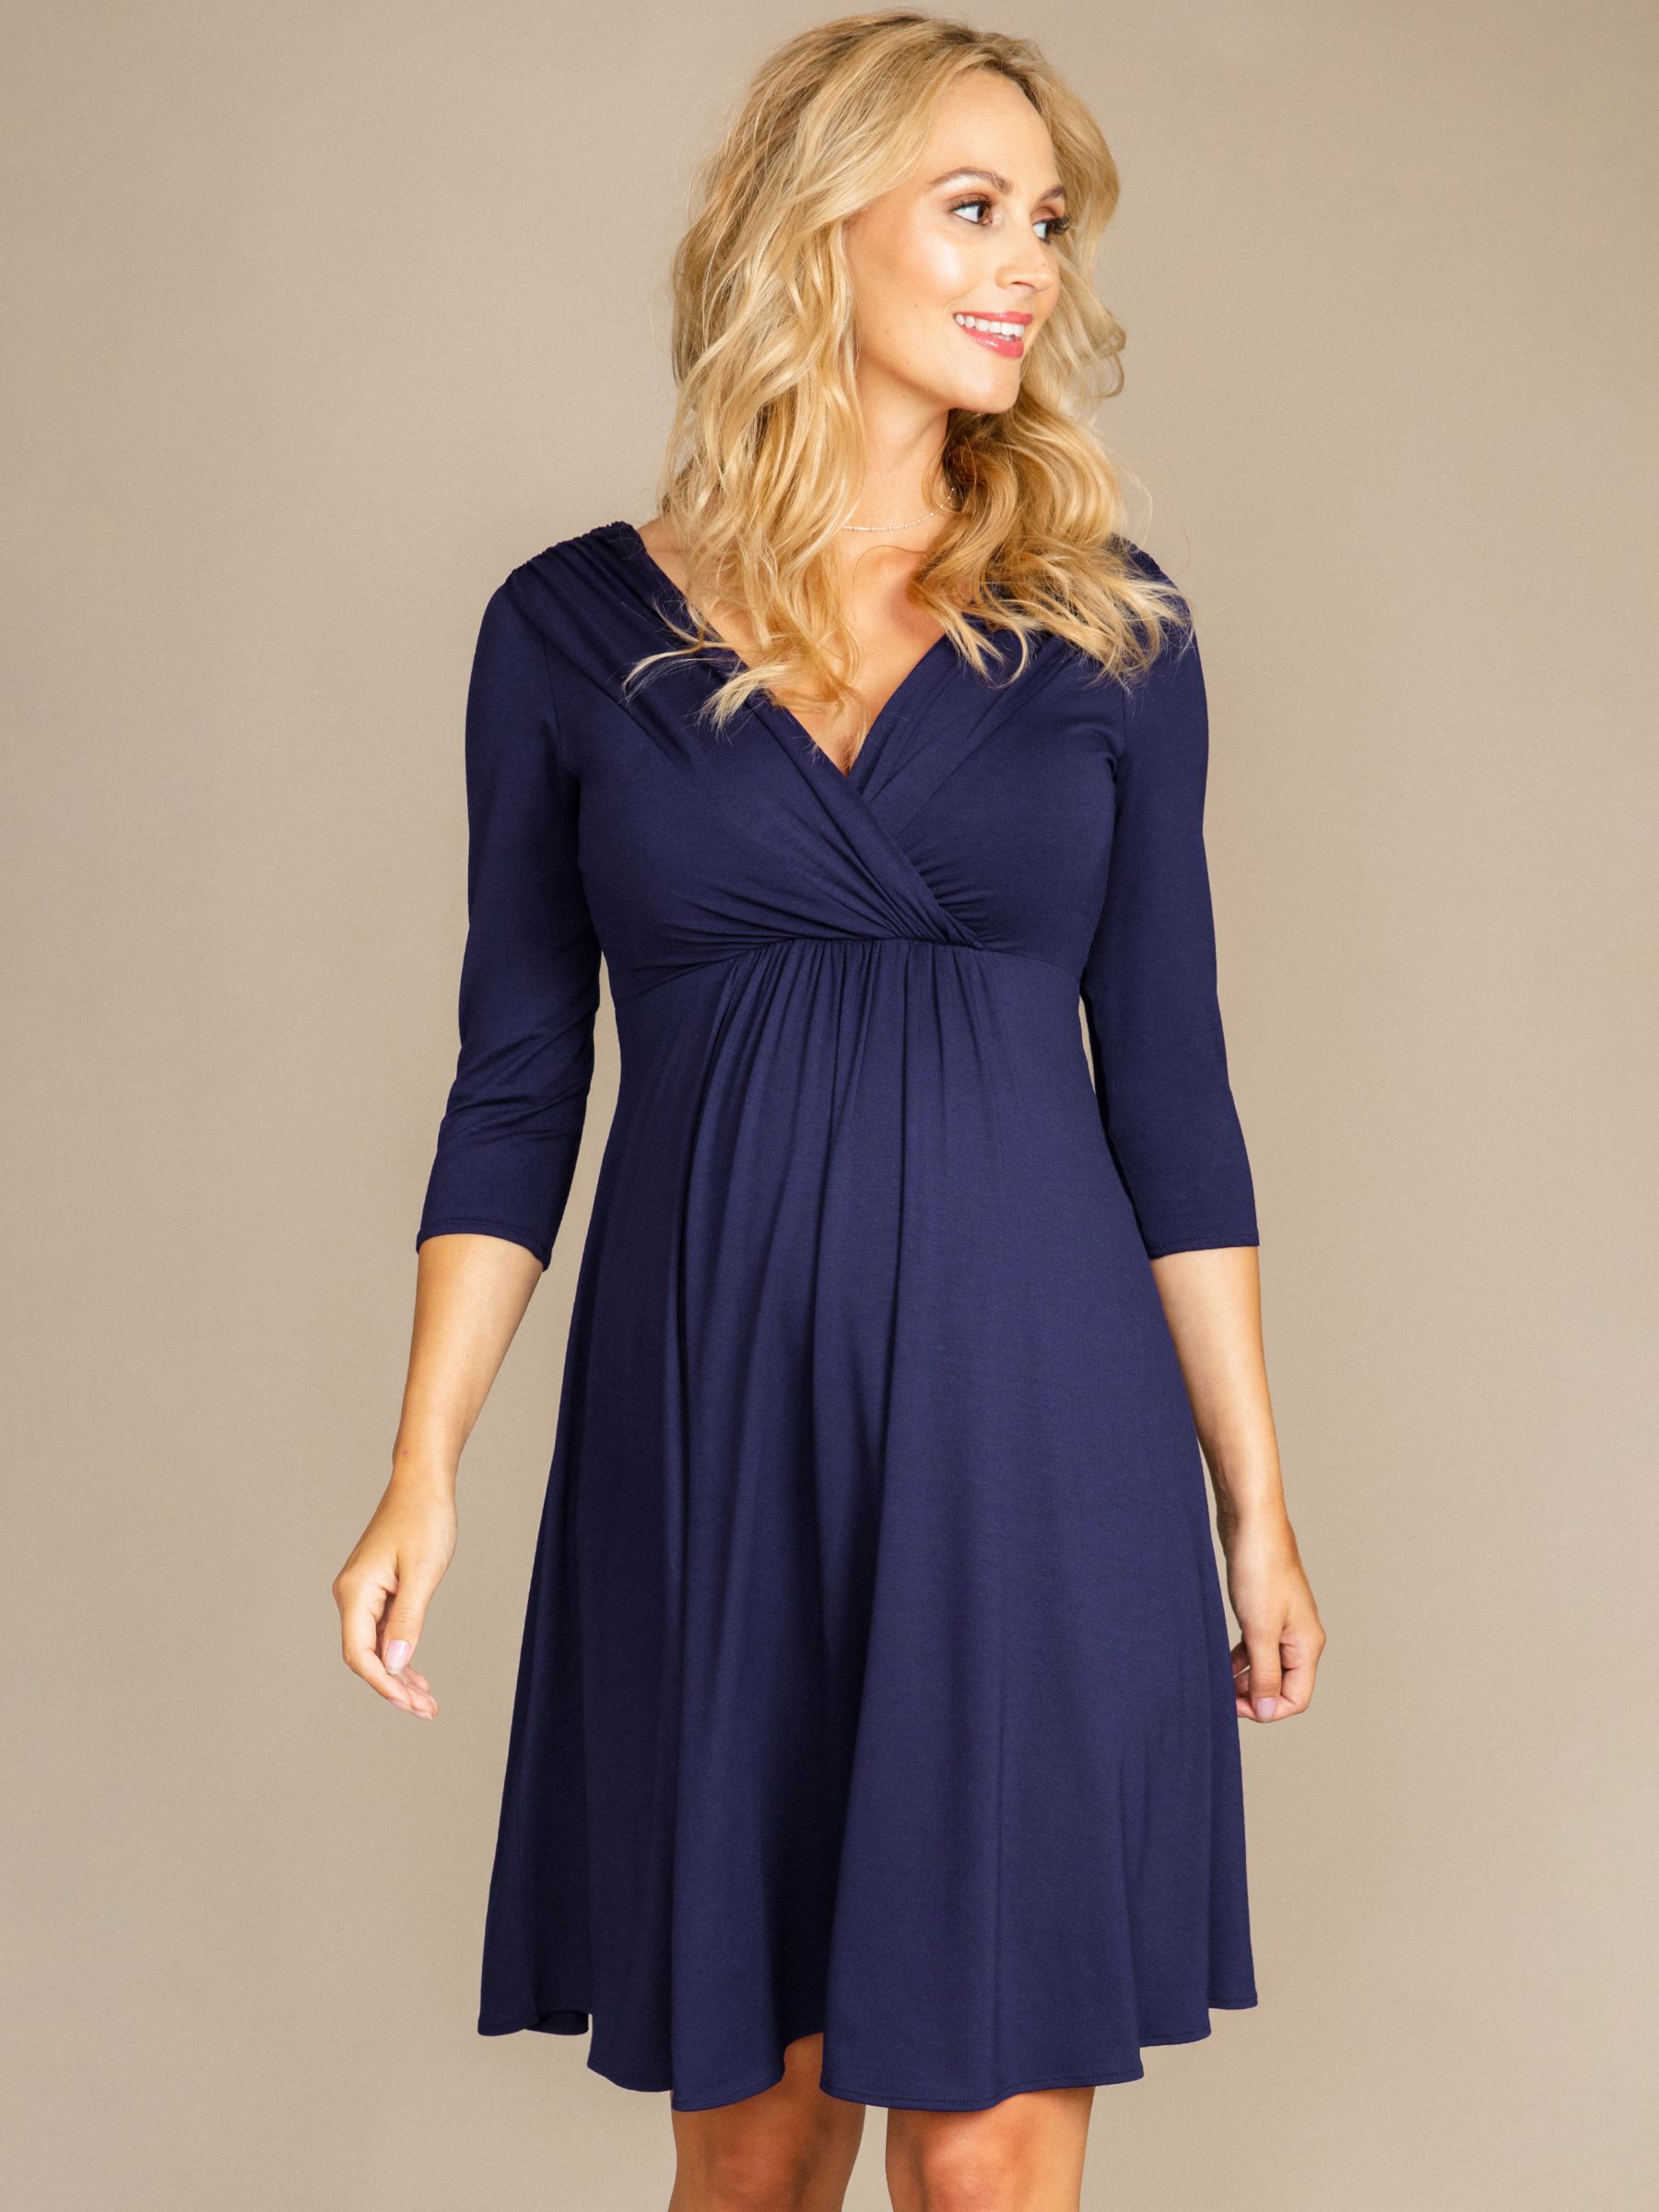 Tiffany Rose Willow Maternity Dress, Eclipse Blue, 6-8